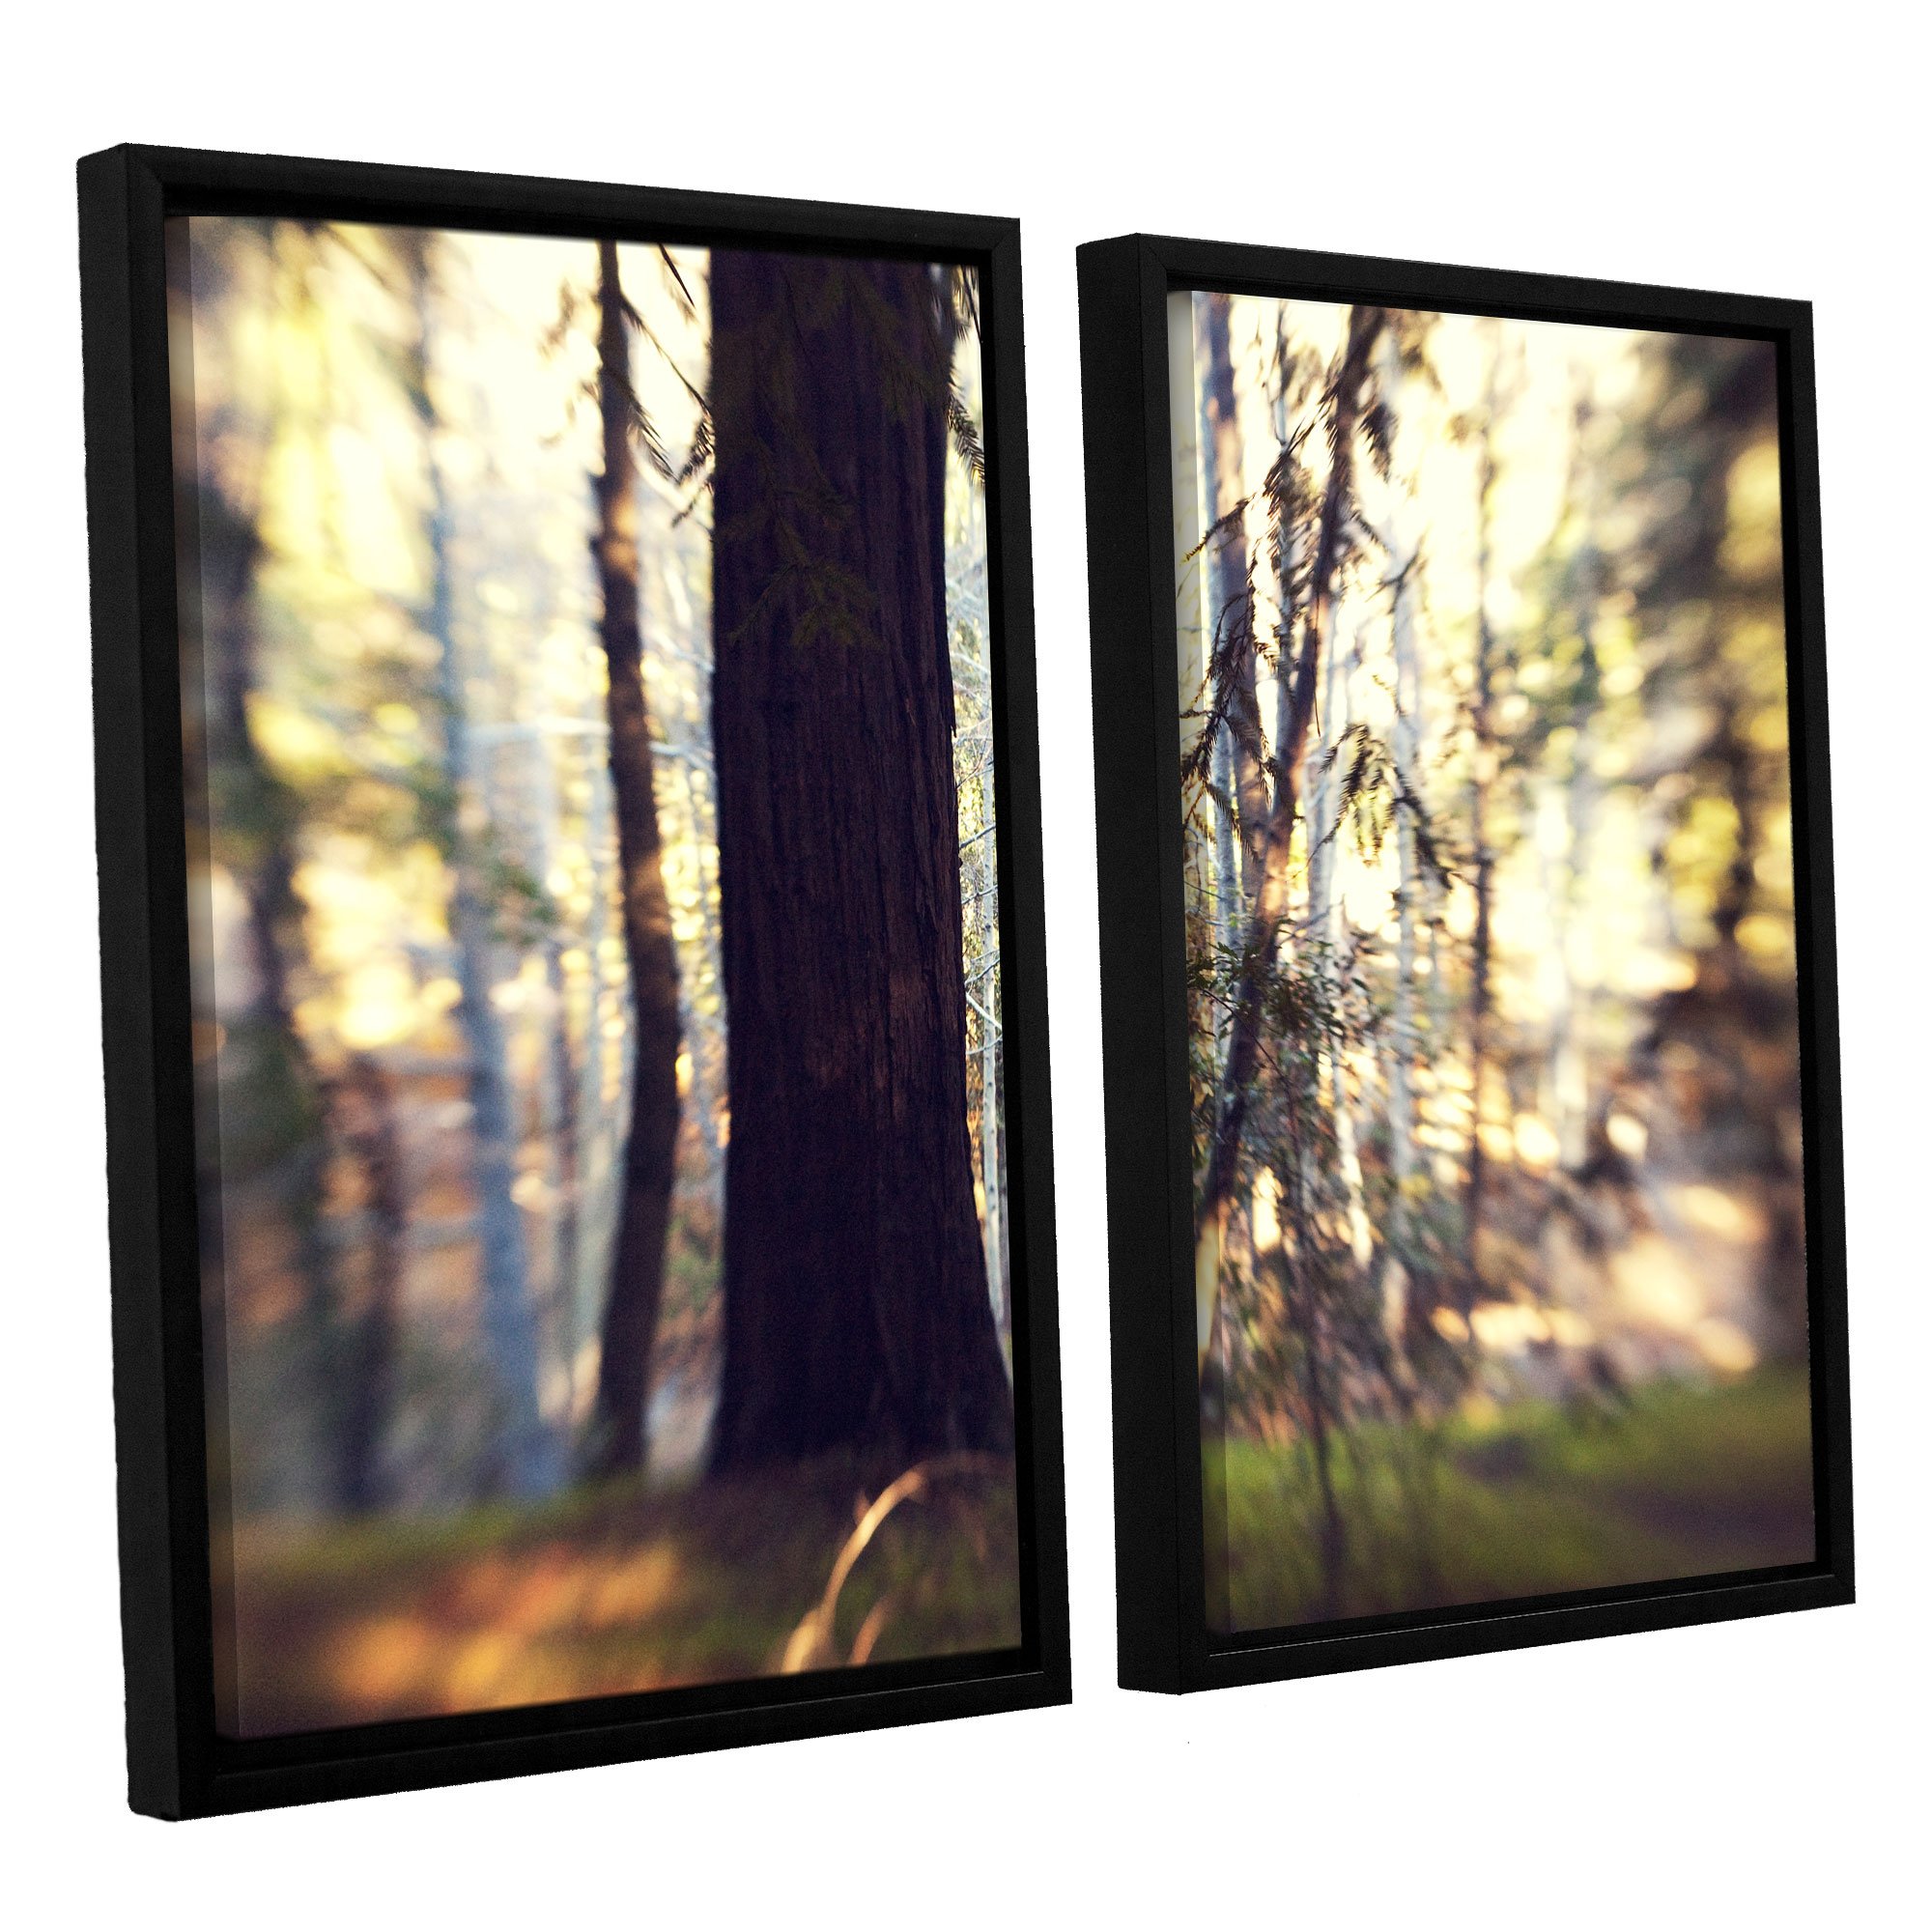 ArtWall 2 Piece Elana Ray's Titan of the Forest Set Floater Framed Canvas, 24 x 36", Multicolor